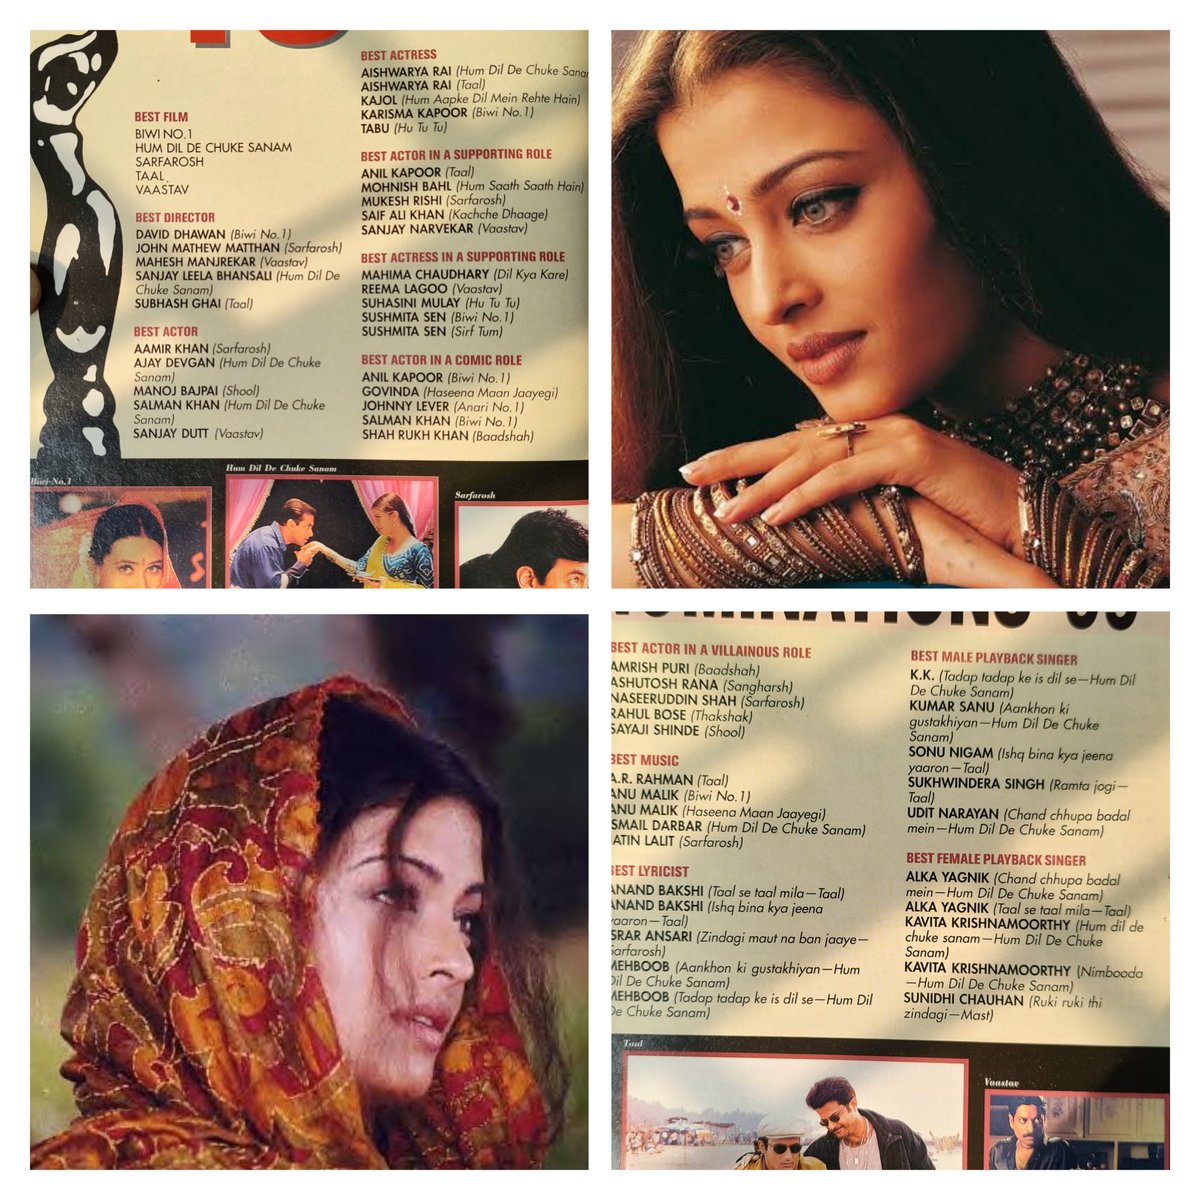 45th Annual Filmfare Awards
When #AishwaryaRaiBachchan was nominated in Best Actress Category for 2 movies. 
#HumDilDeChukeSanam
& #Taal